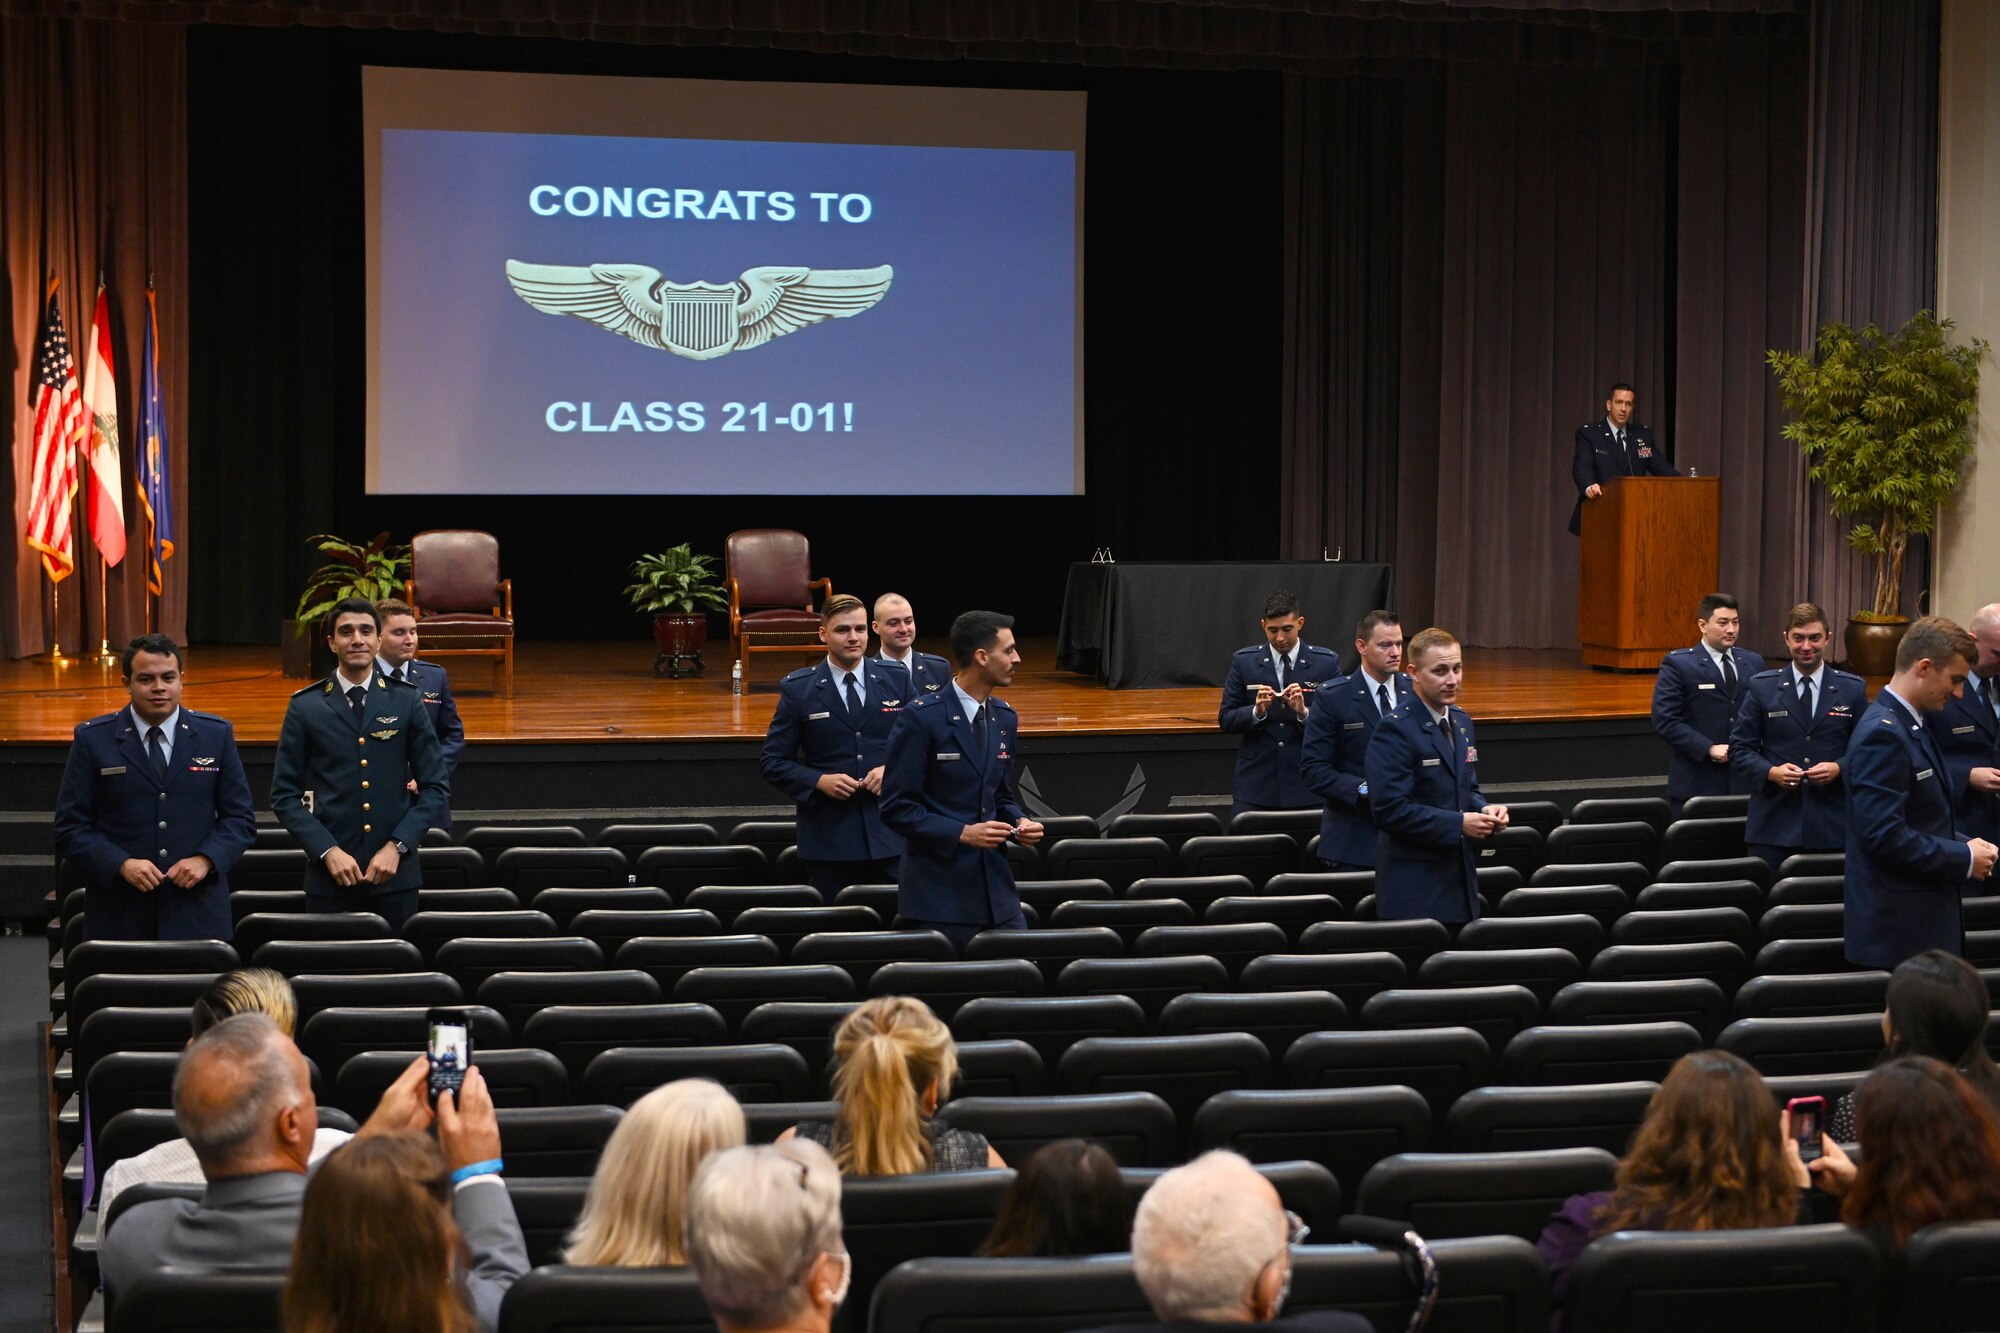 The graduating class of 21-01 stands to break their silver wings in half Oct. 23, 2020, on Columbus Air Force Base Miss. The traditional breaking of the wings symbolizes the sacrifice made to the pilots who put their lives on the line for their country. The two halves are never to be brought together again while the pilot is alive. (U.S. Air Force photo by Senior Airman Jake Jacobsen)